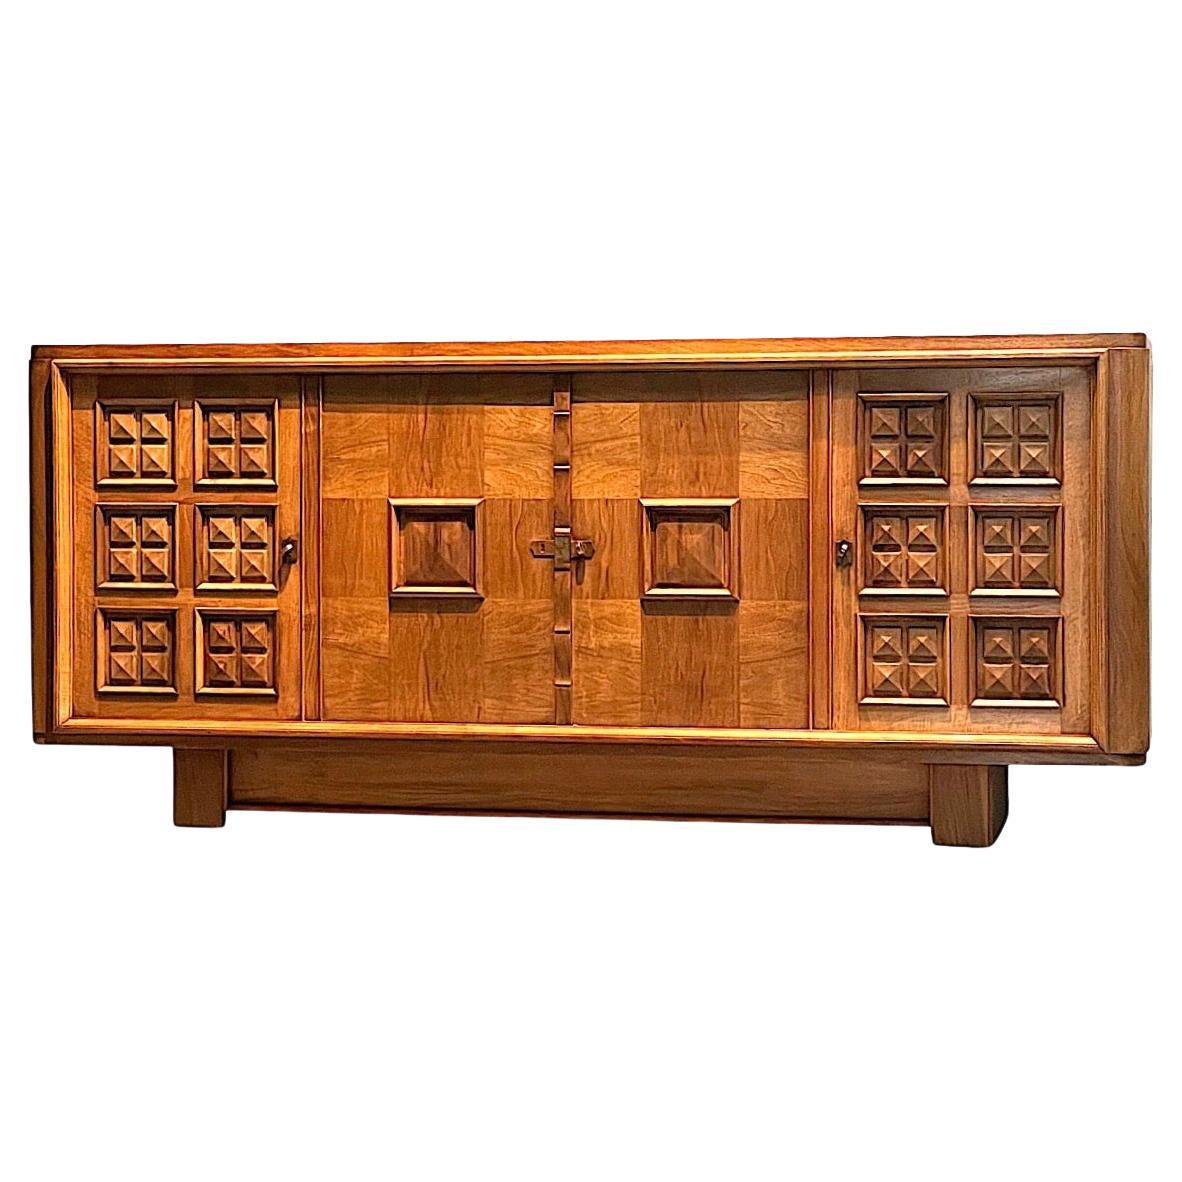 Walnut Four Door Credenza With Decorative Raised Panels, France, 1940s